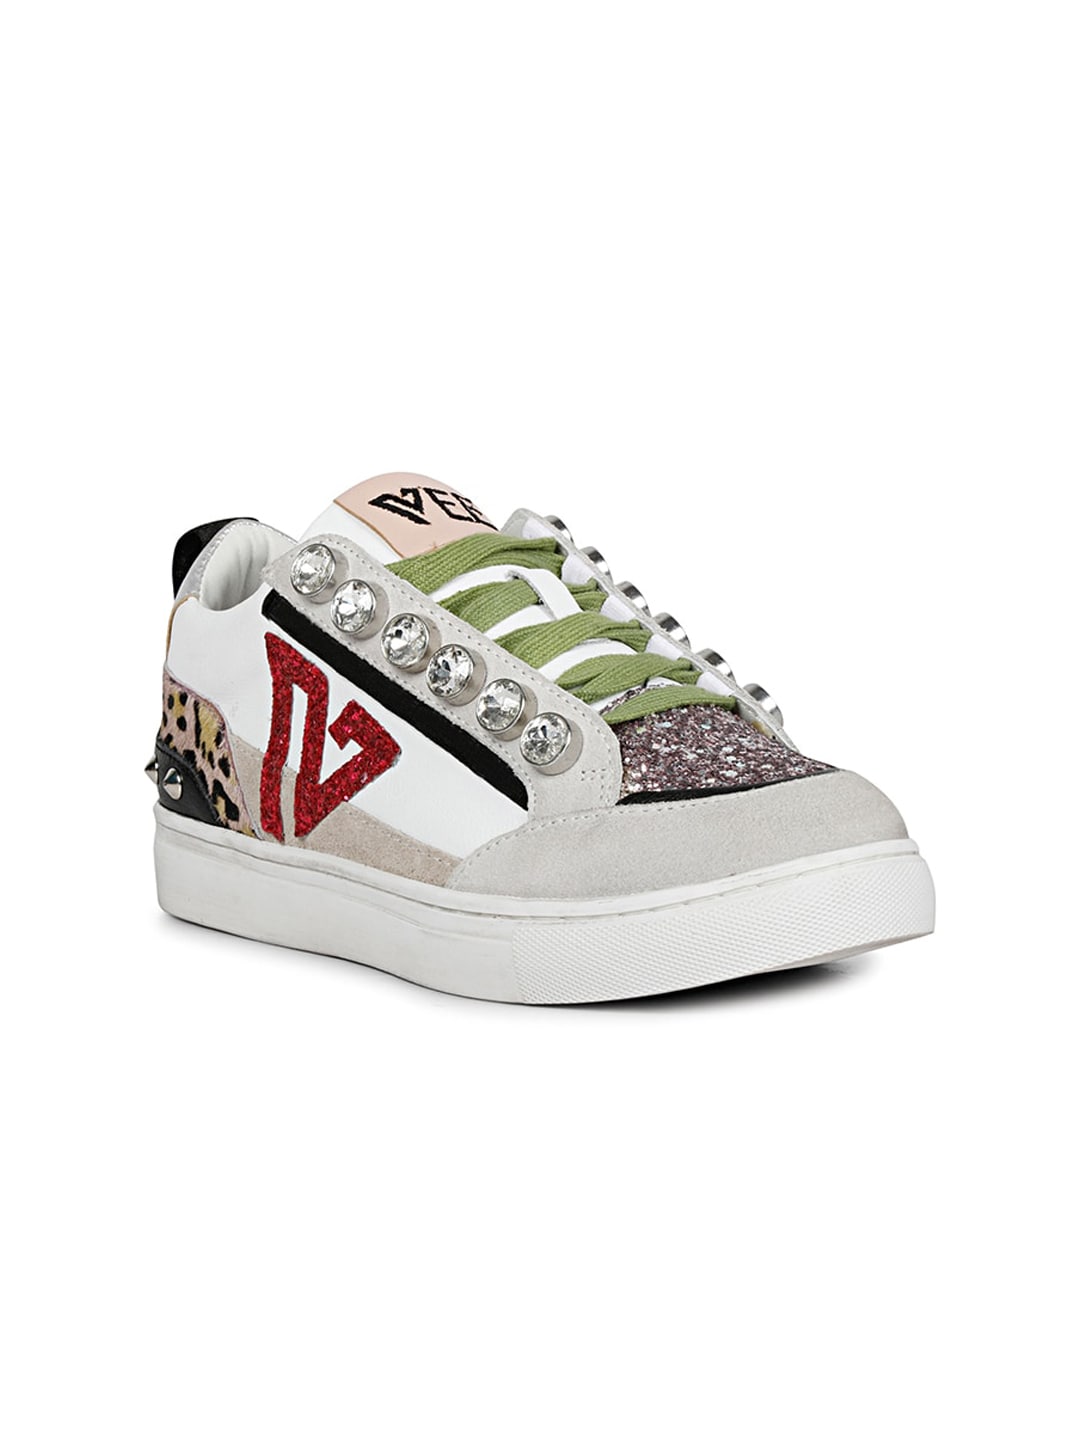 Saint G Women Printed Embellished Leather Sneakers Price in India